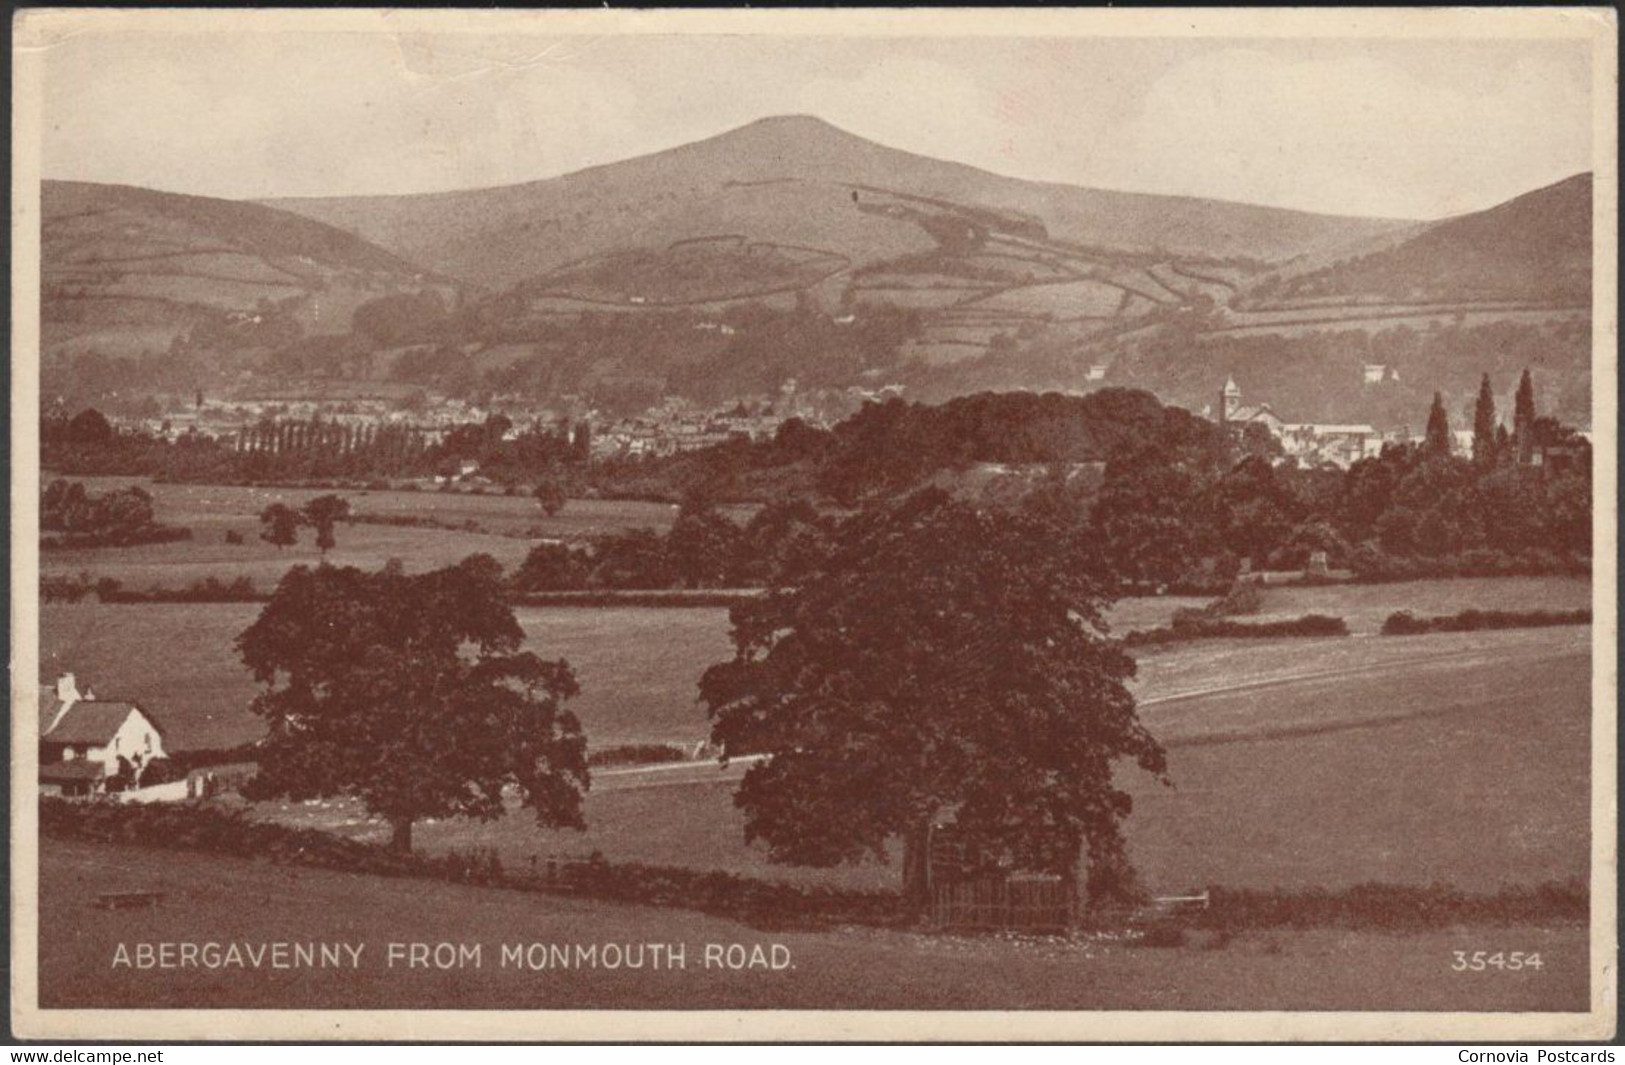 Abergavenny From Monmouth Road, Monmouthshire, C.1940 - Valentine's Postcard - Merionethshire